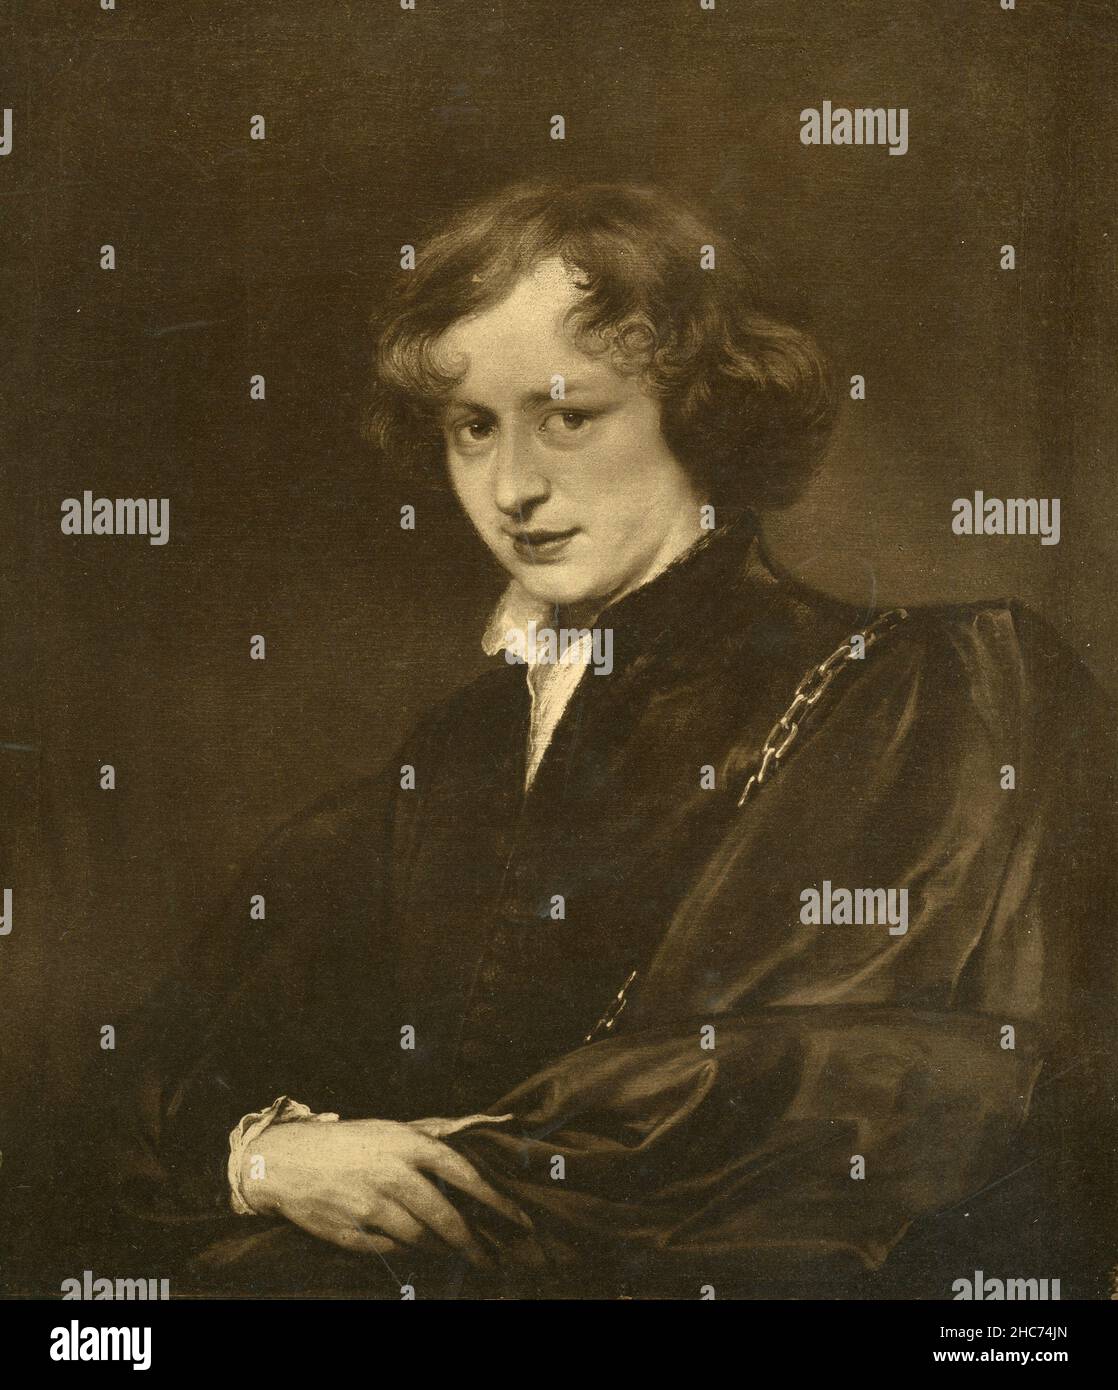 Self-Portrait of the Artist, painting by Flemish artist Anthony van Dyck, Munich 1897 Stock Photo